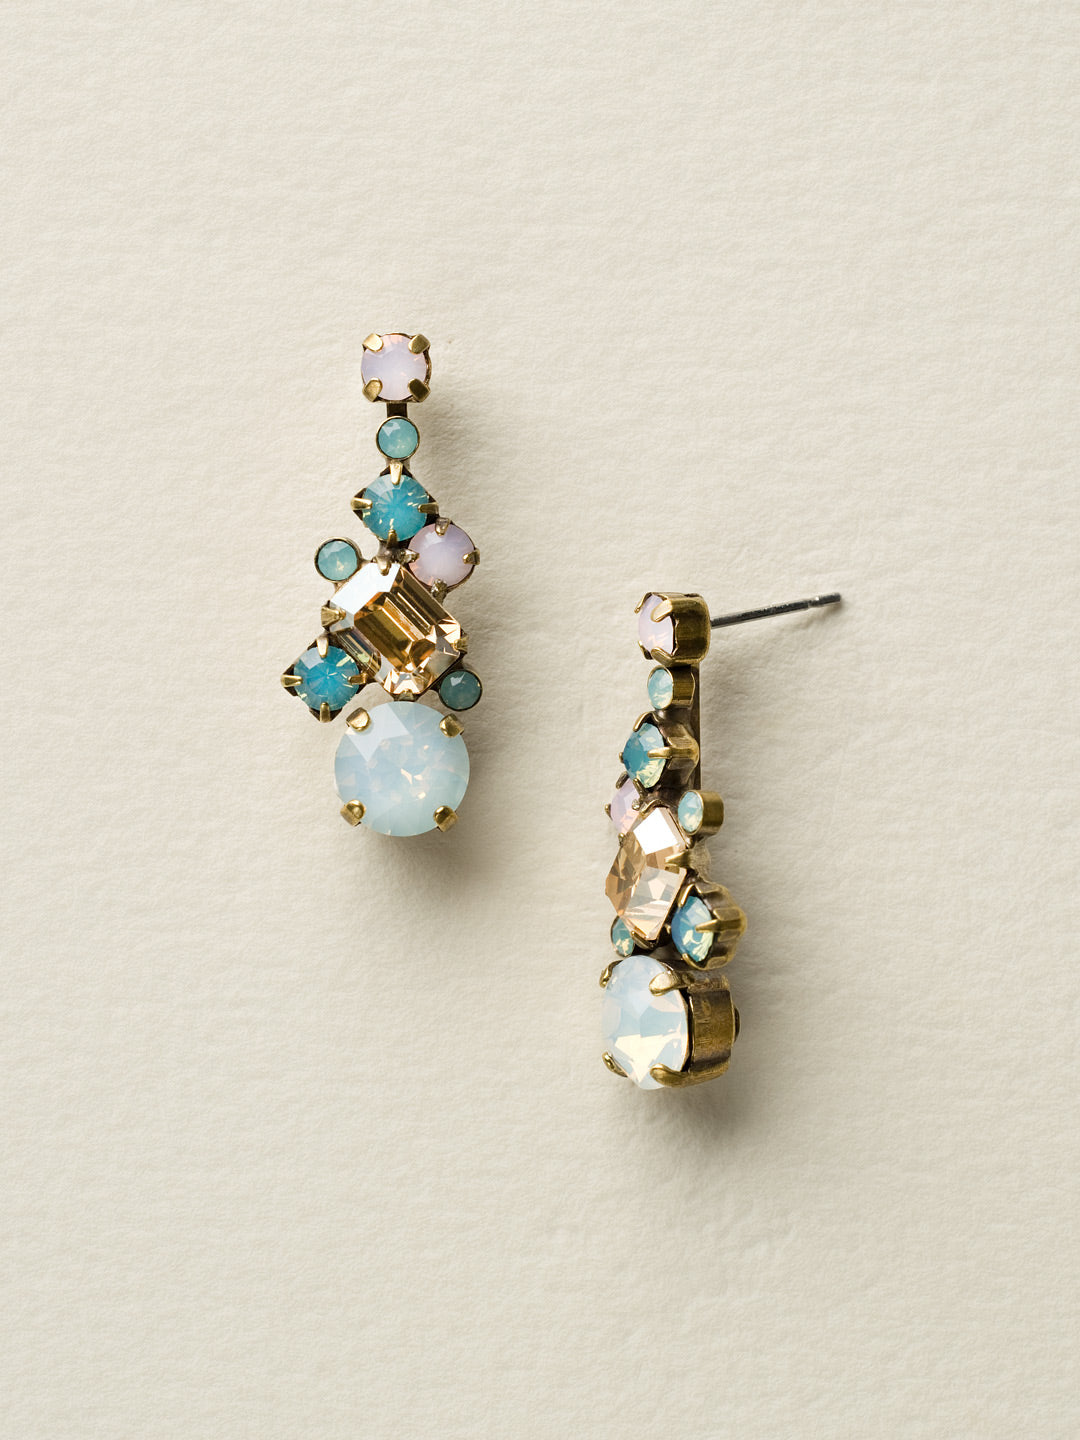 Glittering Multi-Cut Crystal Earring - ECF6AGROW - <p>Where simple meets stunning. This delicate drop earring features a central emerald cut crystal surrounded by clusters of smaller, round stones. From Sorrelli's Rose Water collection in our Antique Gold-tone finish.</p>